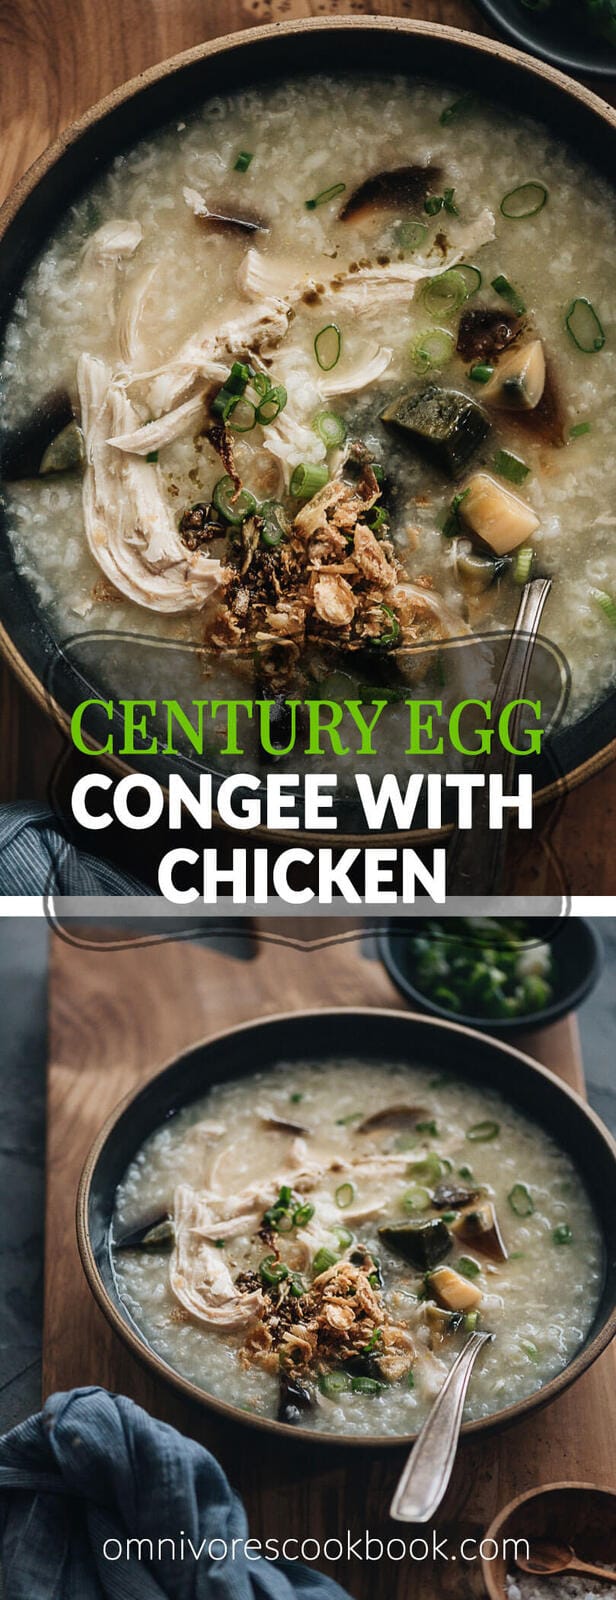 Century Egg Congee with Chicken - Silky creamy congee with shredded chicken cooked in one pot. This recipe requires minimal prep and includes both an Instant Pot version and a stovetop version. {Gluten-Free adaptable} #chinese #comfortfood